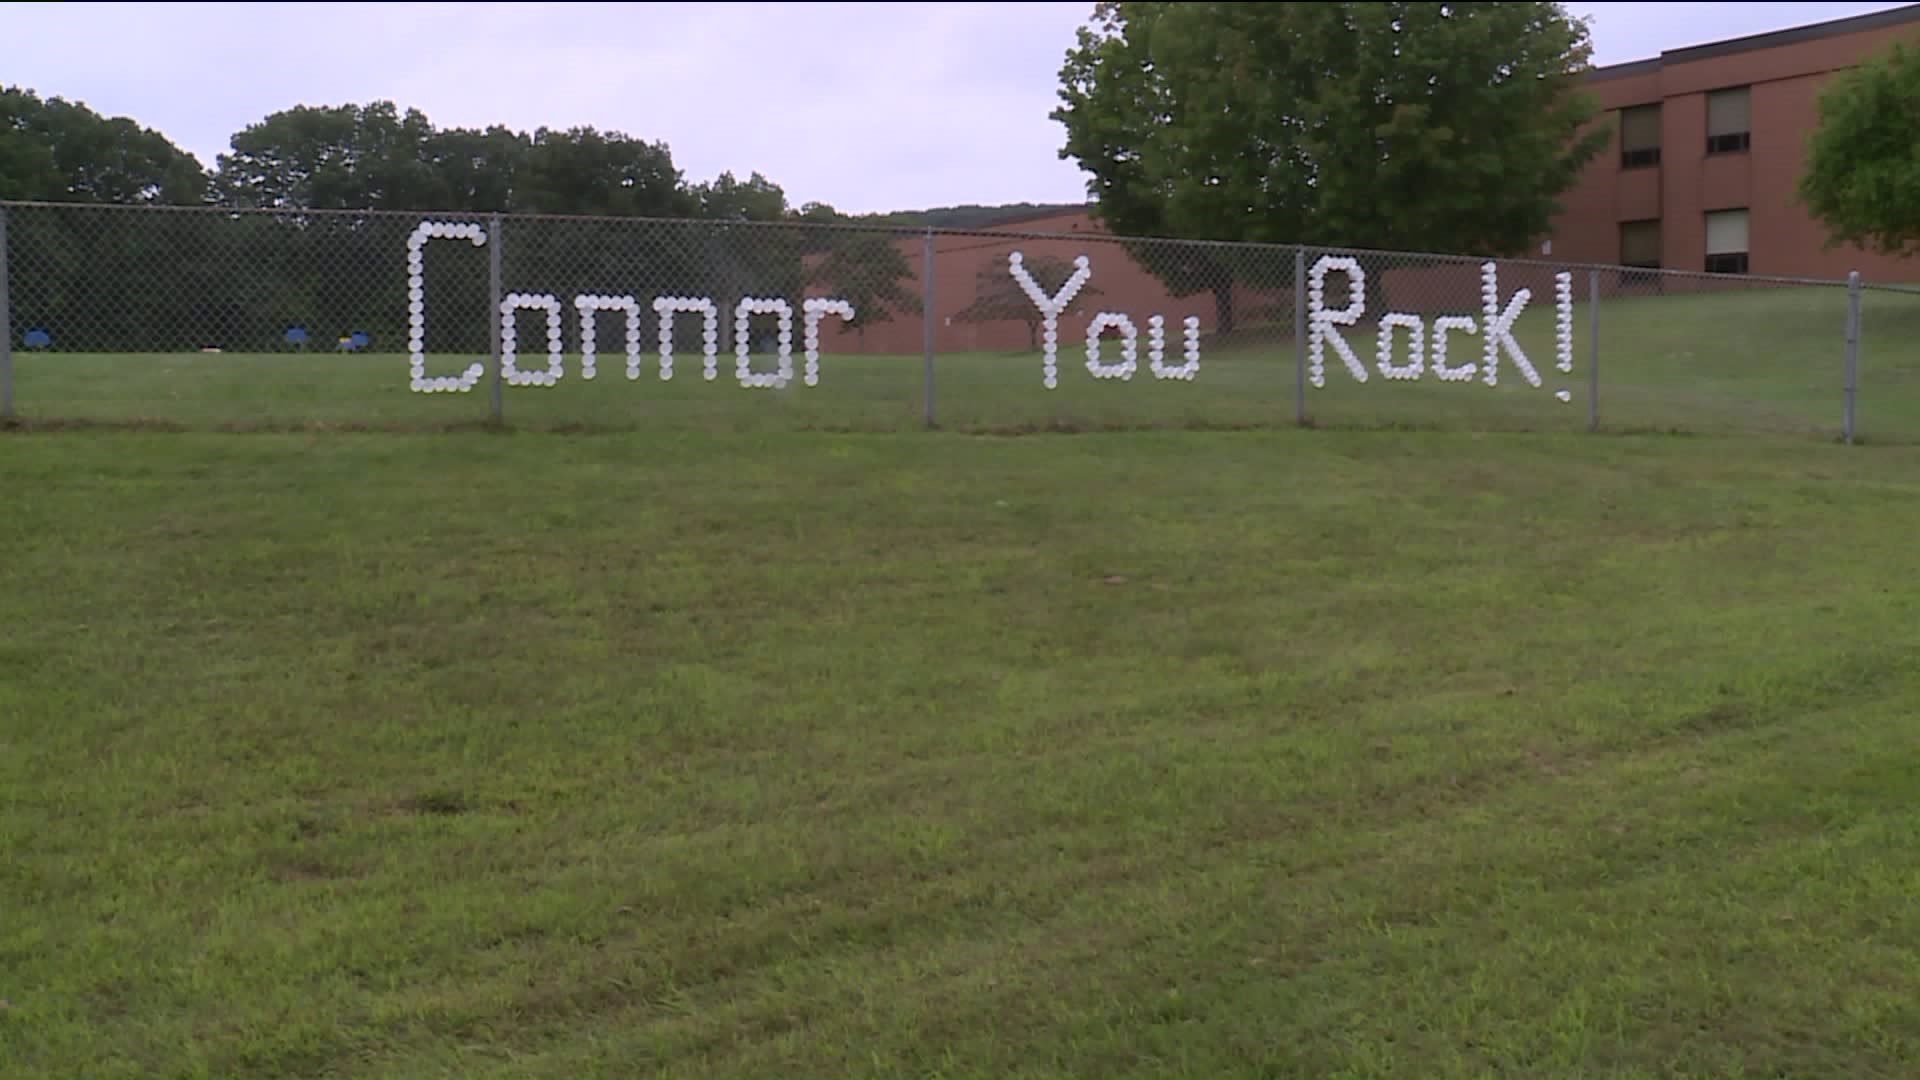 Cups for Connor: Messages of hope in a Bristol fence